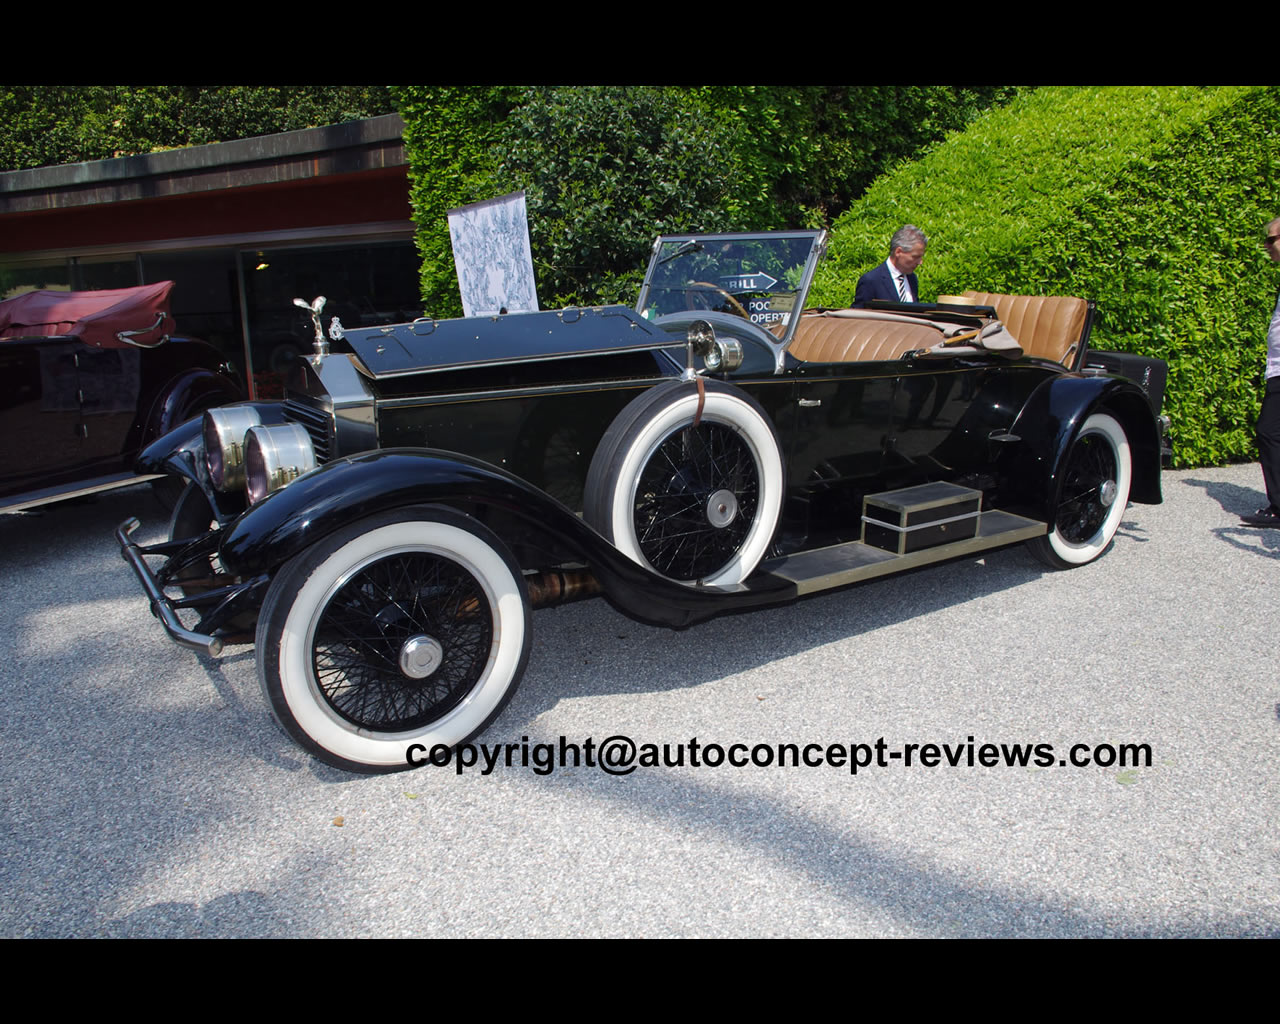 Rolls Royce Silver Ghost Picadilly roadster